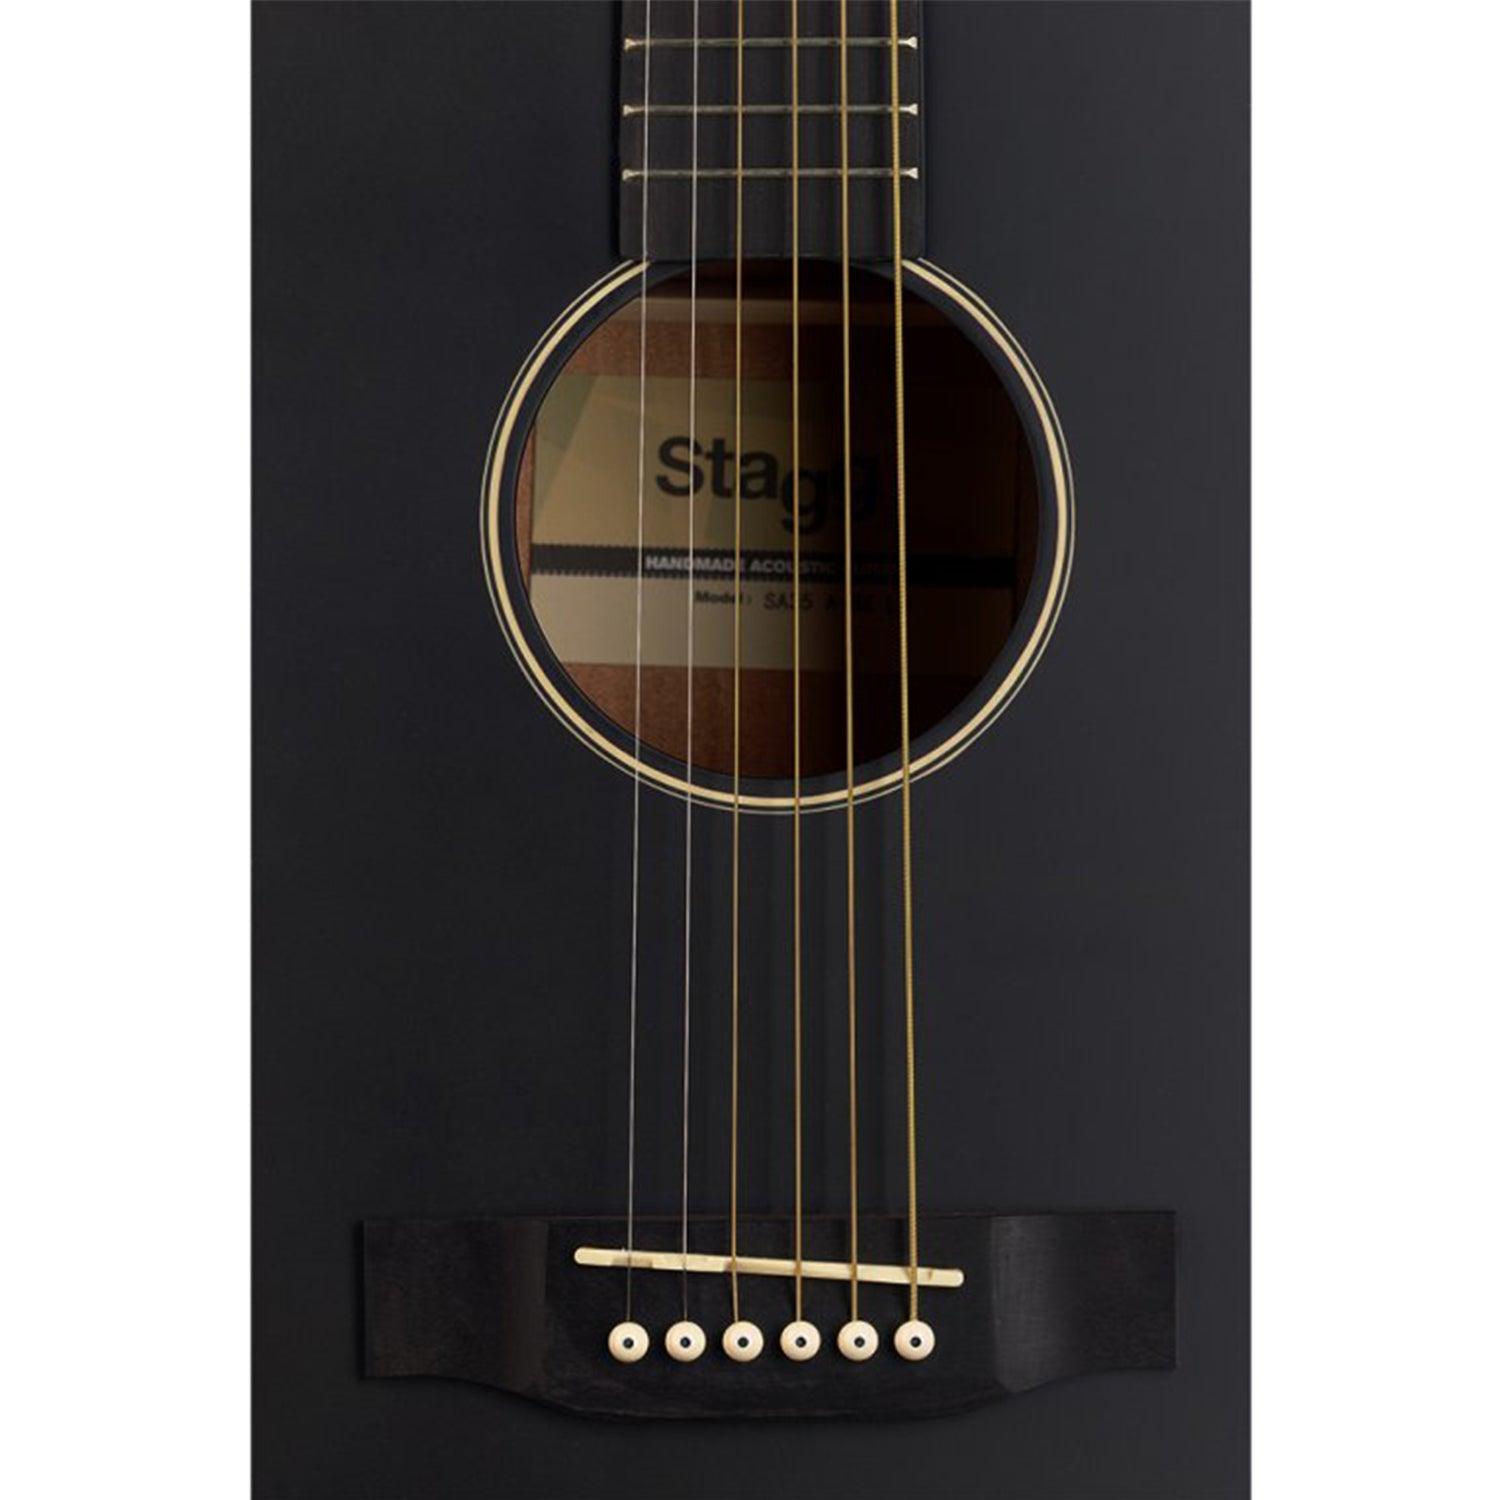 Stagg SA35 A-BK LH Black Auditorium Guitar with Basswood Top Left Hand - DY Pro Audio